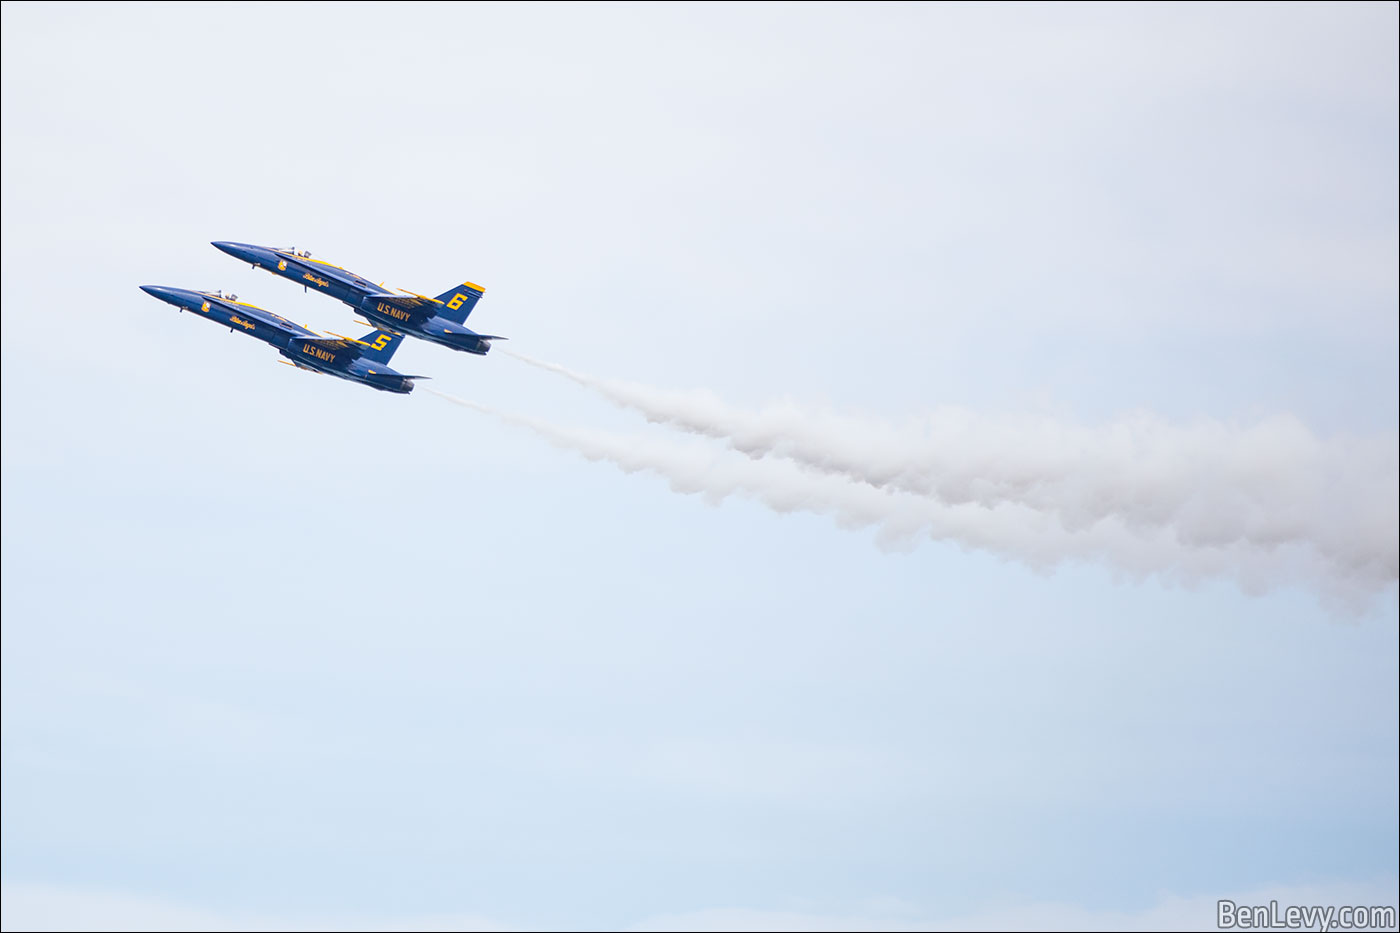 A pair of Blue Angels planes